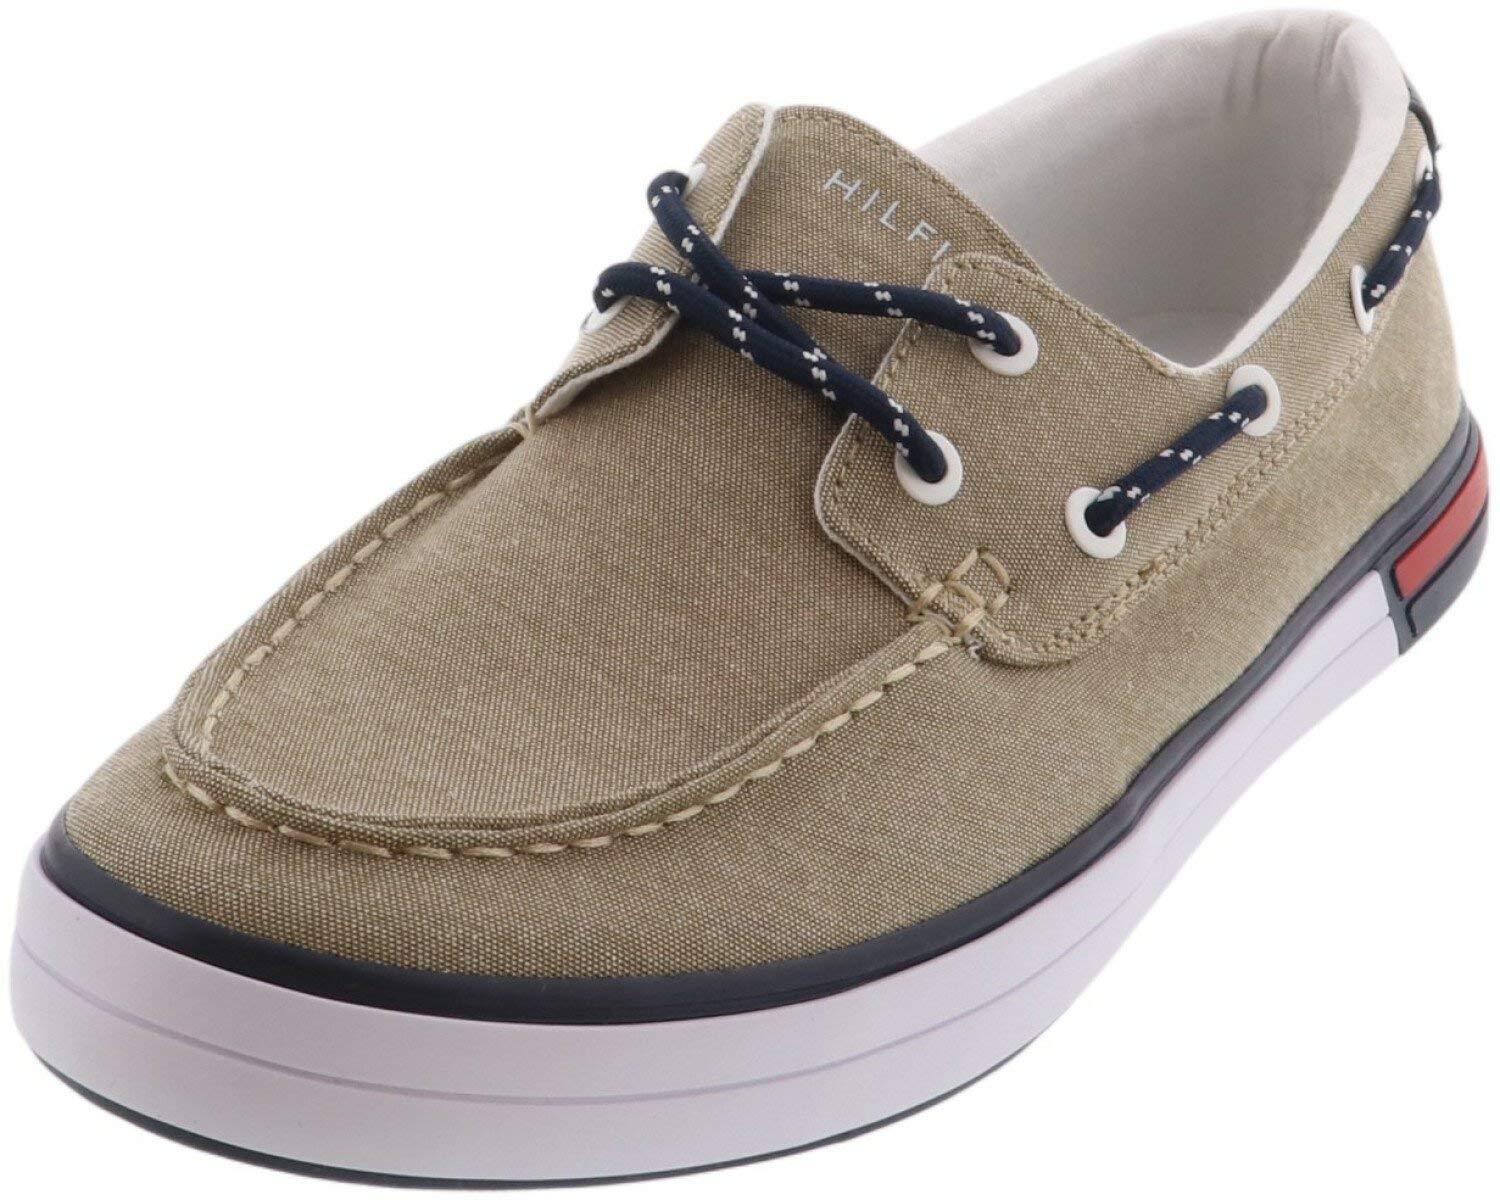 Tommy Hilfiger Realm2 Boat Shoe in Khaki (Gray) for Men - Lyst